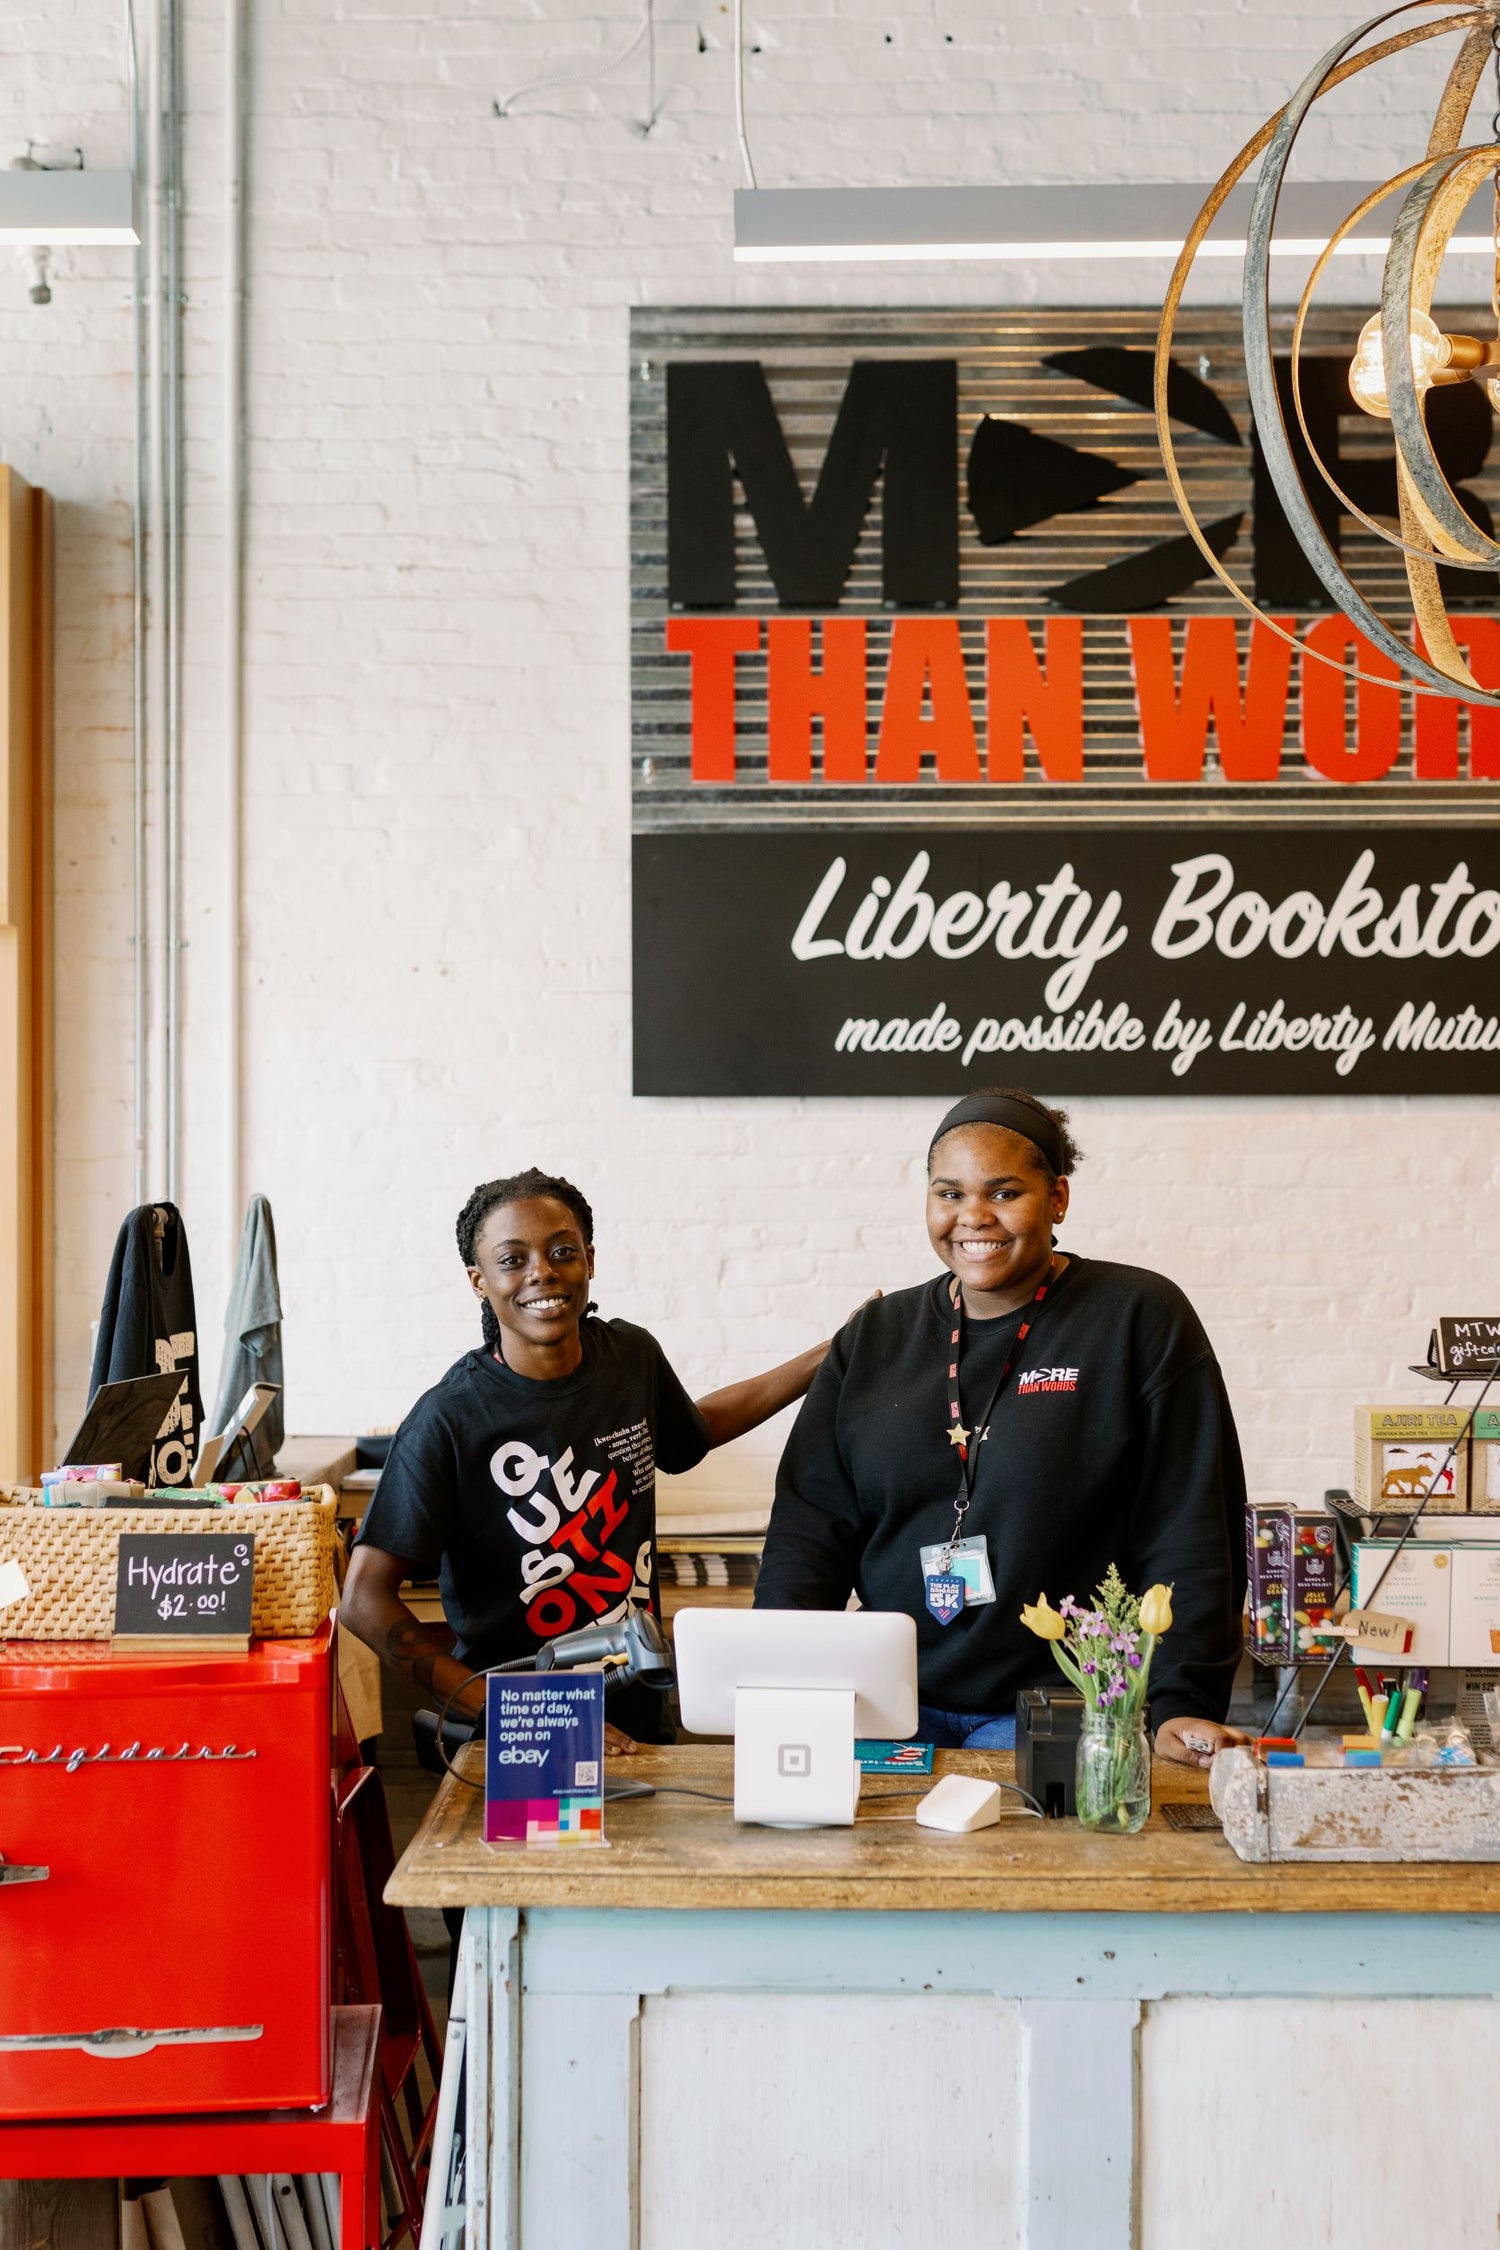 Two women wearing professional attire stand behind a bookstore counter, surrounded by neatly arranged shelves of books